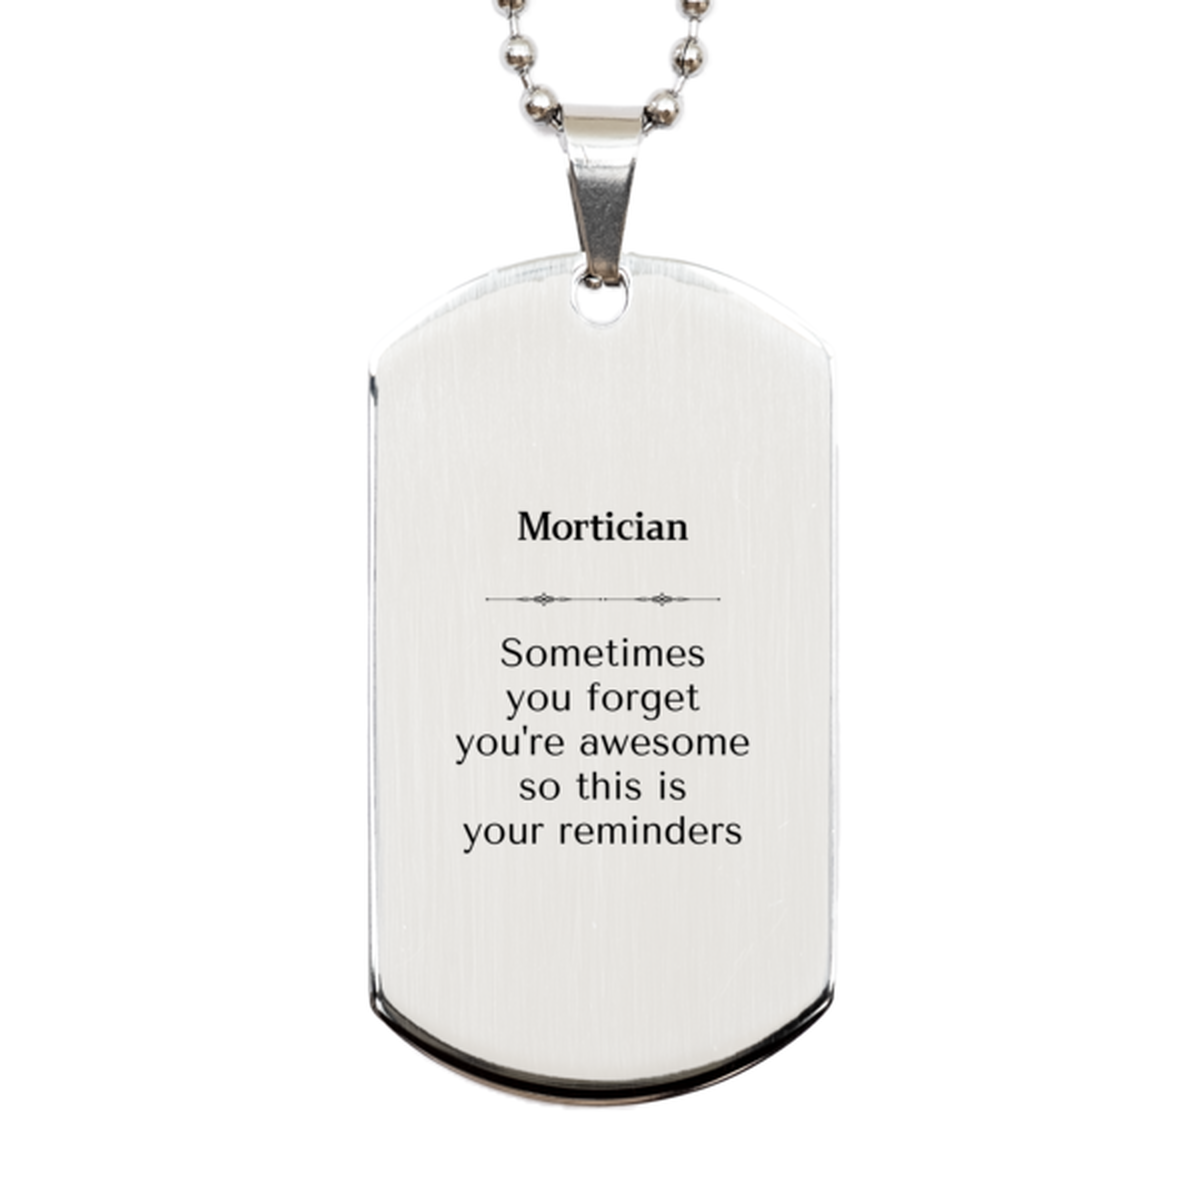 Sentimental Mortician Silver Dog Tag, Mortician Sometimes you forget you're awesome so this is your reminders, Graduation Christmas Birthday Gifts for Mortician, Men, Women, Coworkers